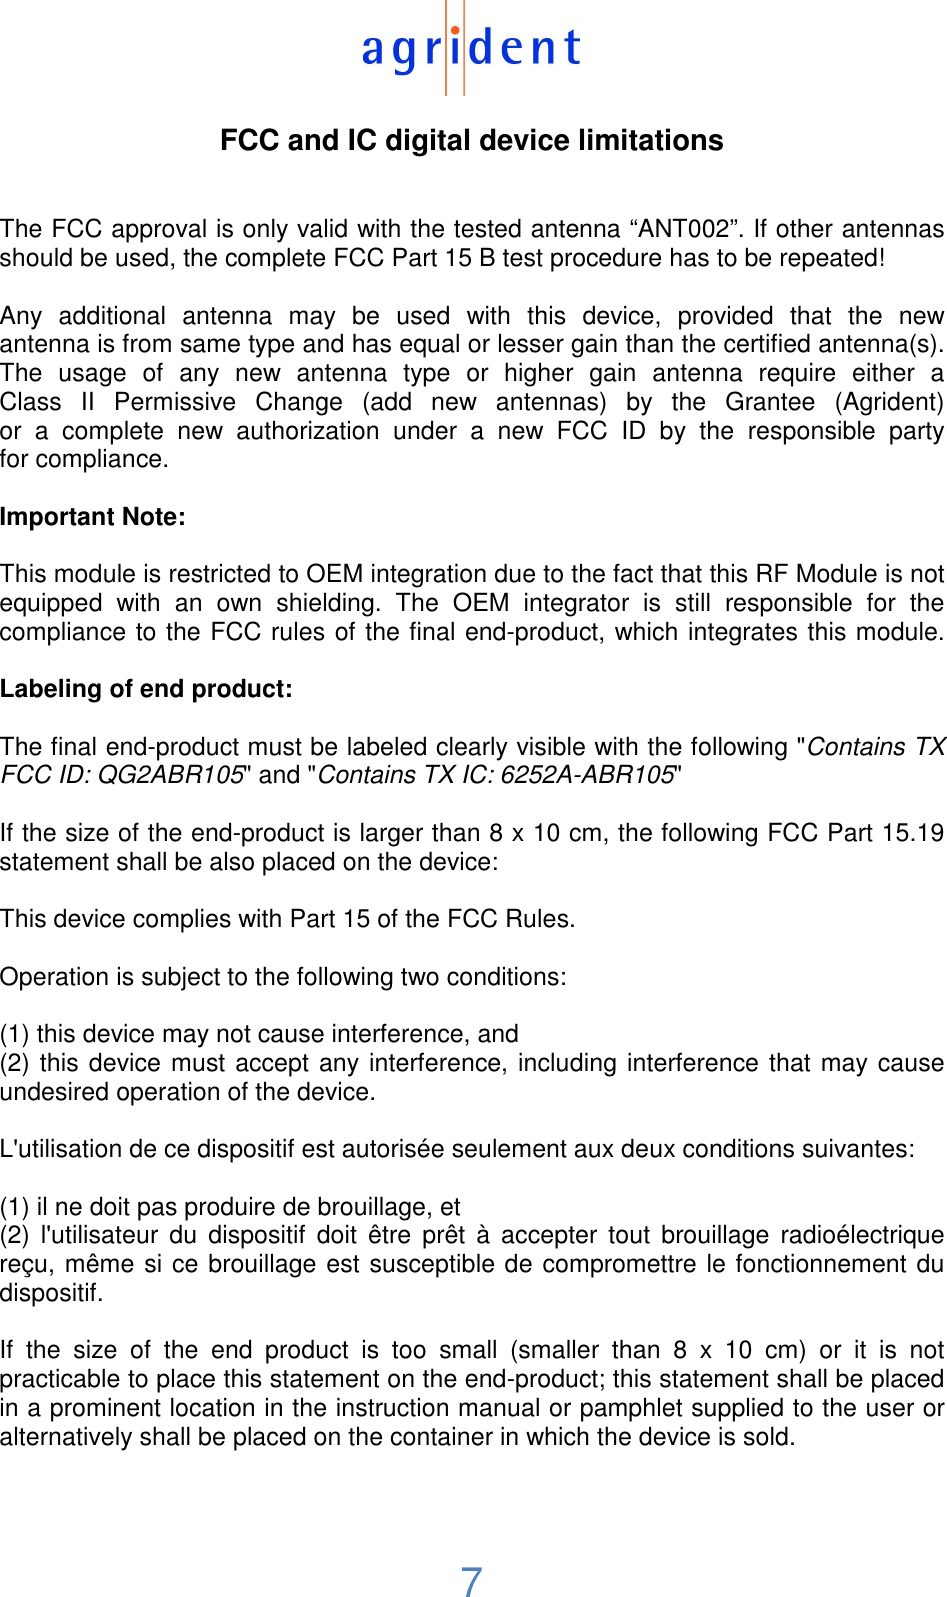  7  FCC and IC digital device limitations   The FCC approval is only valid with the tested antenna “ANT002”. If other antennas should be used, the complete FCC Part 15 B test procedure has to be repeated!  Any  additional  antenna  may  be  used  with  this  device,  provided  that  the  new antenna is from same type and has equal or lesser gain than the certified antenna(s). The  usage  of  any  new  antenna  type  or  higher  gain  antenna  require  either  a Class  II  Permissive  Change  (add  new  antennas)  by  the  Grantee  (Agrident) or  a  complete  new  authorization  under  a  new  FCC  ID  by  the  responsible  party for compliance.  Important Note:  This module is restricted to OEM integration due to the fact that this RF Module is not equipped  with  an  own  shielding.  The  OEM  integrator  is  still  responsible  for  the compliance to the FCC rules of the final end-product, which integrates this module.  Labeling of end product:  The final end-product must be labeled clearly visible with the following &quot;Contains TX FCC ID: QG2ABR105&quot; and &quot;Contains TX IC: 6252A-ABR105&quot;  If the size of the end-product is larger than 8 x 10 cm, the following FCC Part 15.19 statement shall be also placed on the device:  This device complies with Part 15 of the FCC Rules.   Operation is subject to the following two conditions:  (1) this device may not cause interference, and (2) this device must accept any interference, including interference that may cause undesired operation of the device.   L&apos;utilisation de ce dispositif est autorisée seulement aux deux conditions suivantes:  (1) il ne doit pas produire de brouillage, et (2)  l&apos;utilisateur  du  dispositif  doit  être  prêt  à  accepter  tout  brouillage  radioélectrique reçu, même si ce brouillage est susceptible de compromettre le fonctionnement du dispositif.  If  the  size  of  the  end  product  is  too  small  (smaller  than  8  x  10  cm)  or  it  is  not practicable to place this statement on the end-product; this statement shall be placed in a prominent location in the instruction manual or pamphlet supplied to the user or alternatively shall be placed on the container in which the device is sold.     